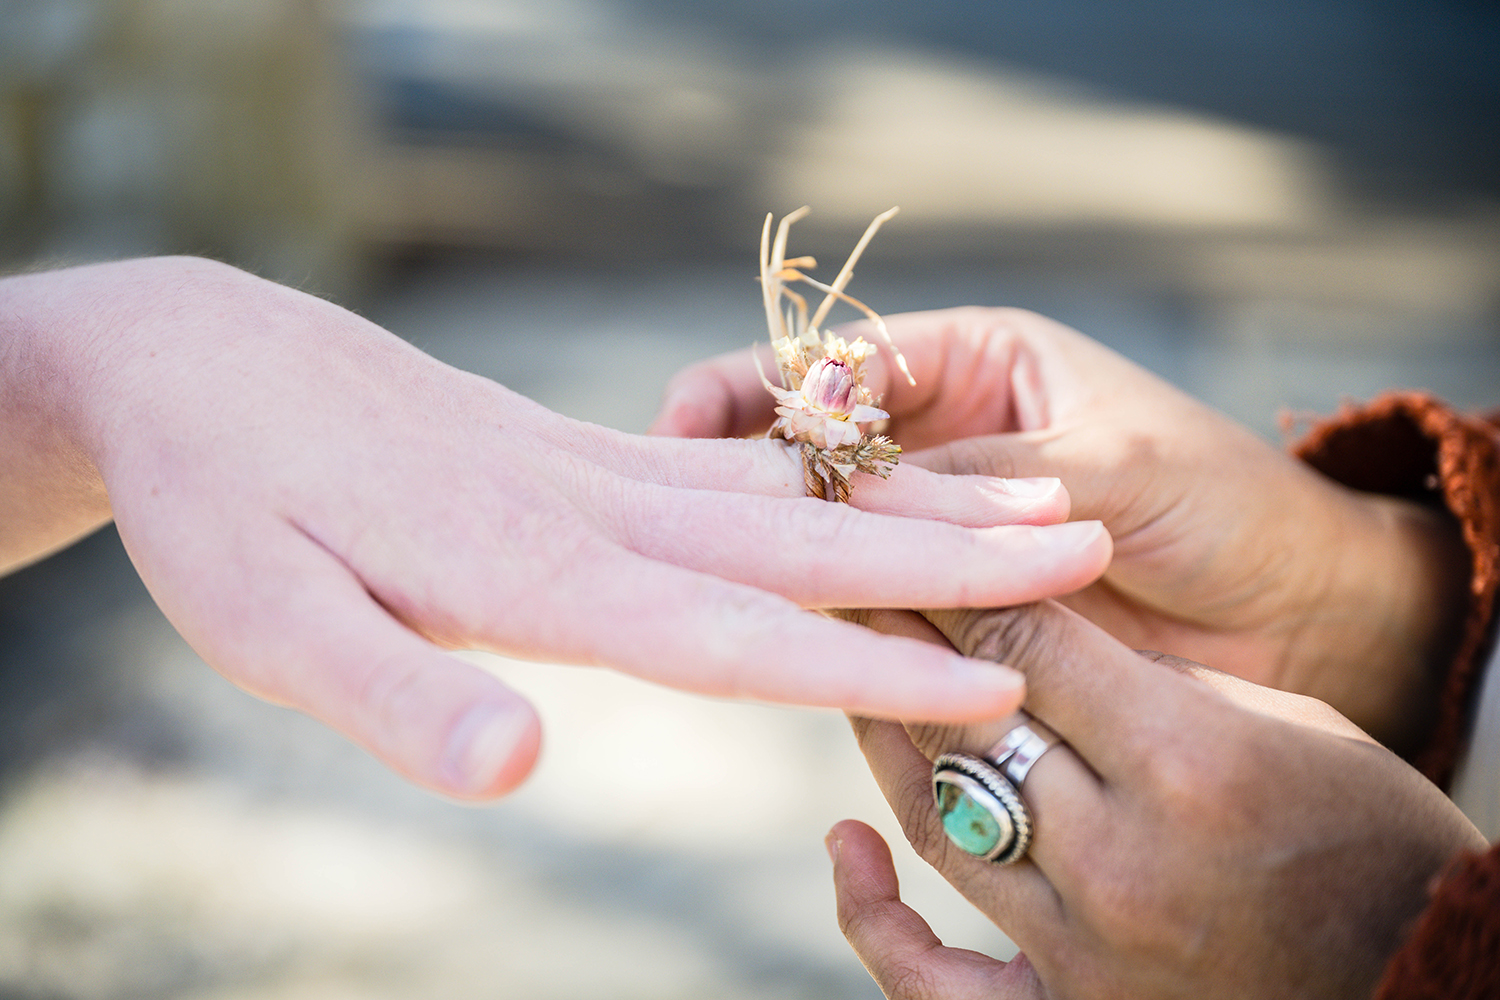 A queer marrier slides a dried flower ring onto their partner's hand during their elopement ceremony at Duck Pond.